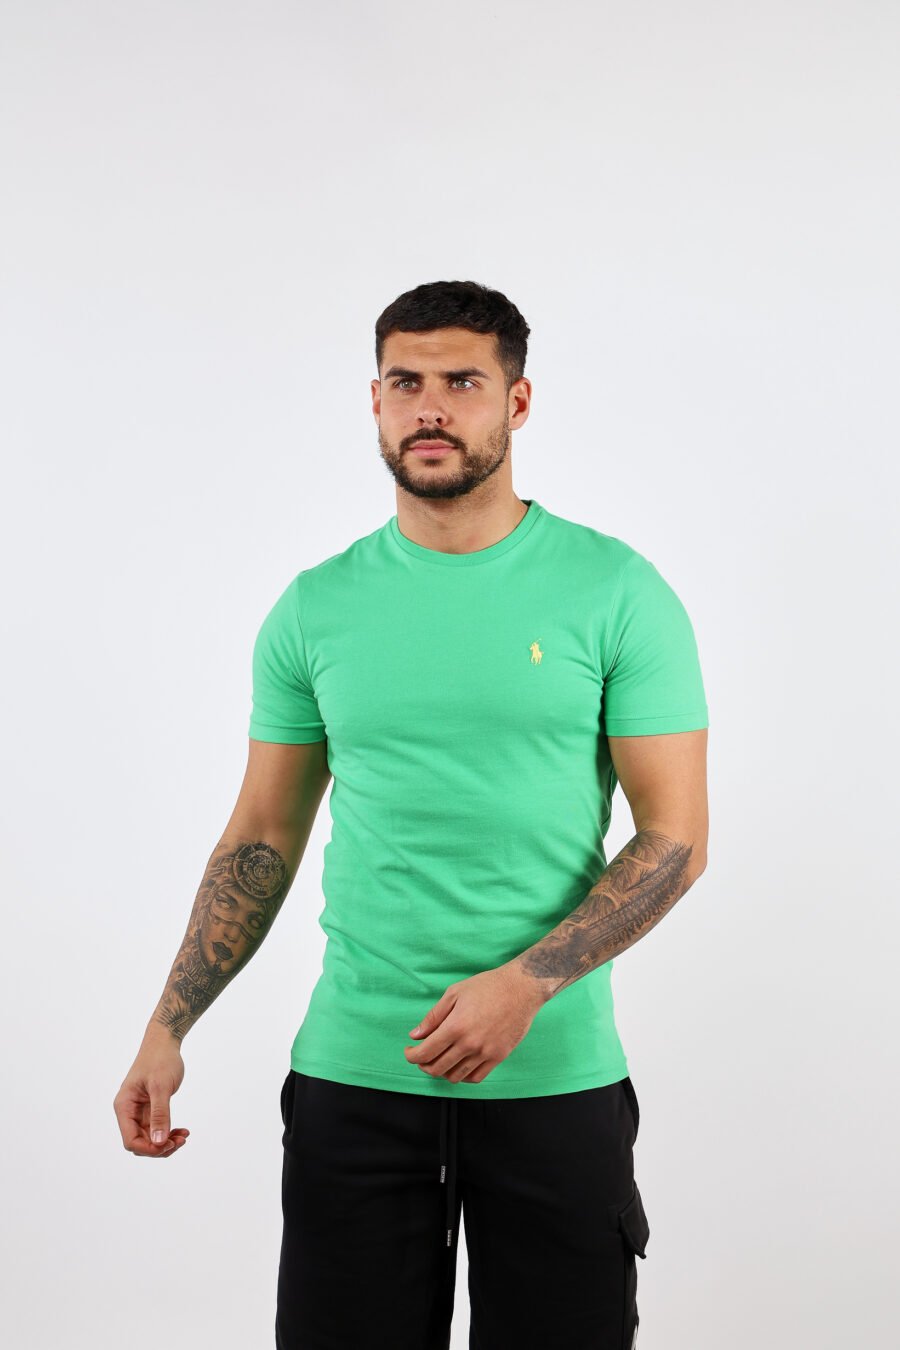 Green and yellow T-shirt with mini-logo "polo" - BLS Fashion 301